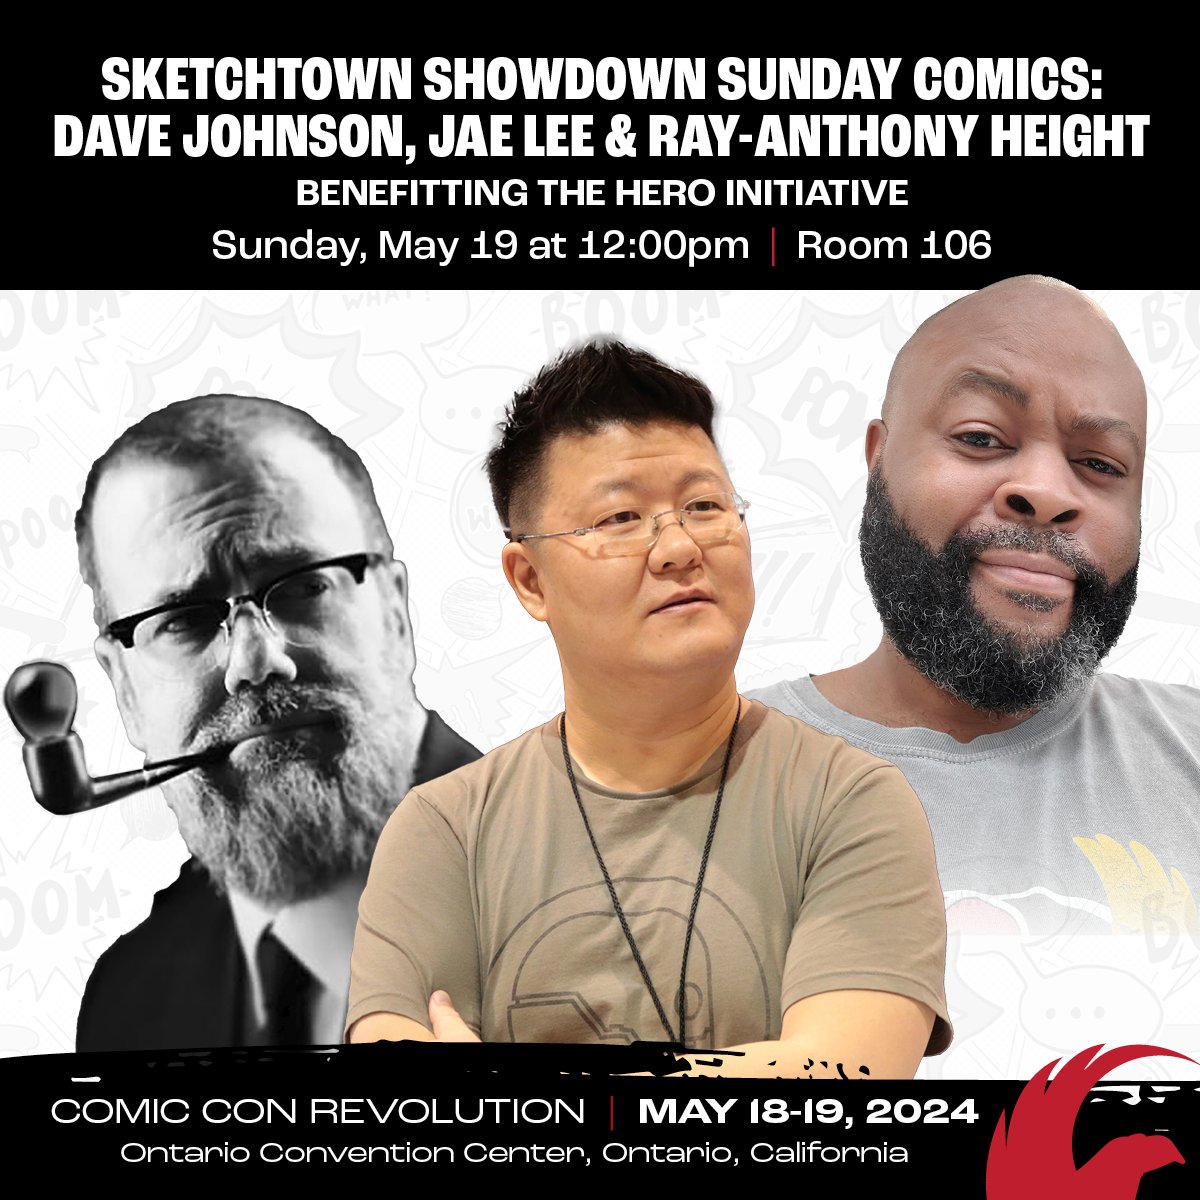 ✏️ Don't miss the Sketchtown Showdown featuring @TheDevilpig #JaeLee & @studioskyetiger benefiting the @heroinitiative live Sun 5/19 at 12:00pm in Room 106 only at #ComicConRevolution! Tickets: CCRTix.com #comiccon #inlandempire #ontariocalifornia #socal